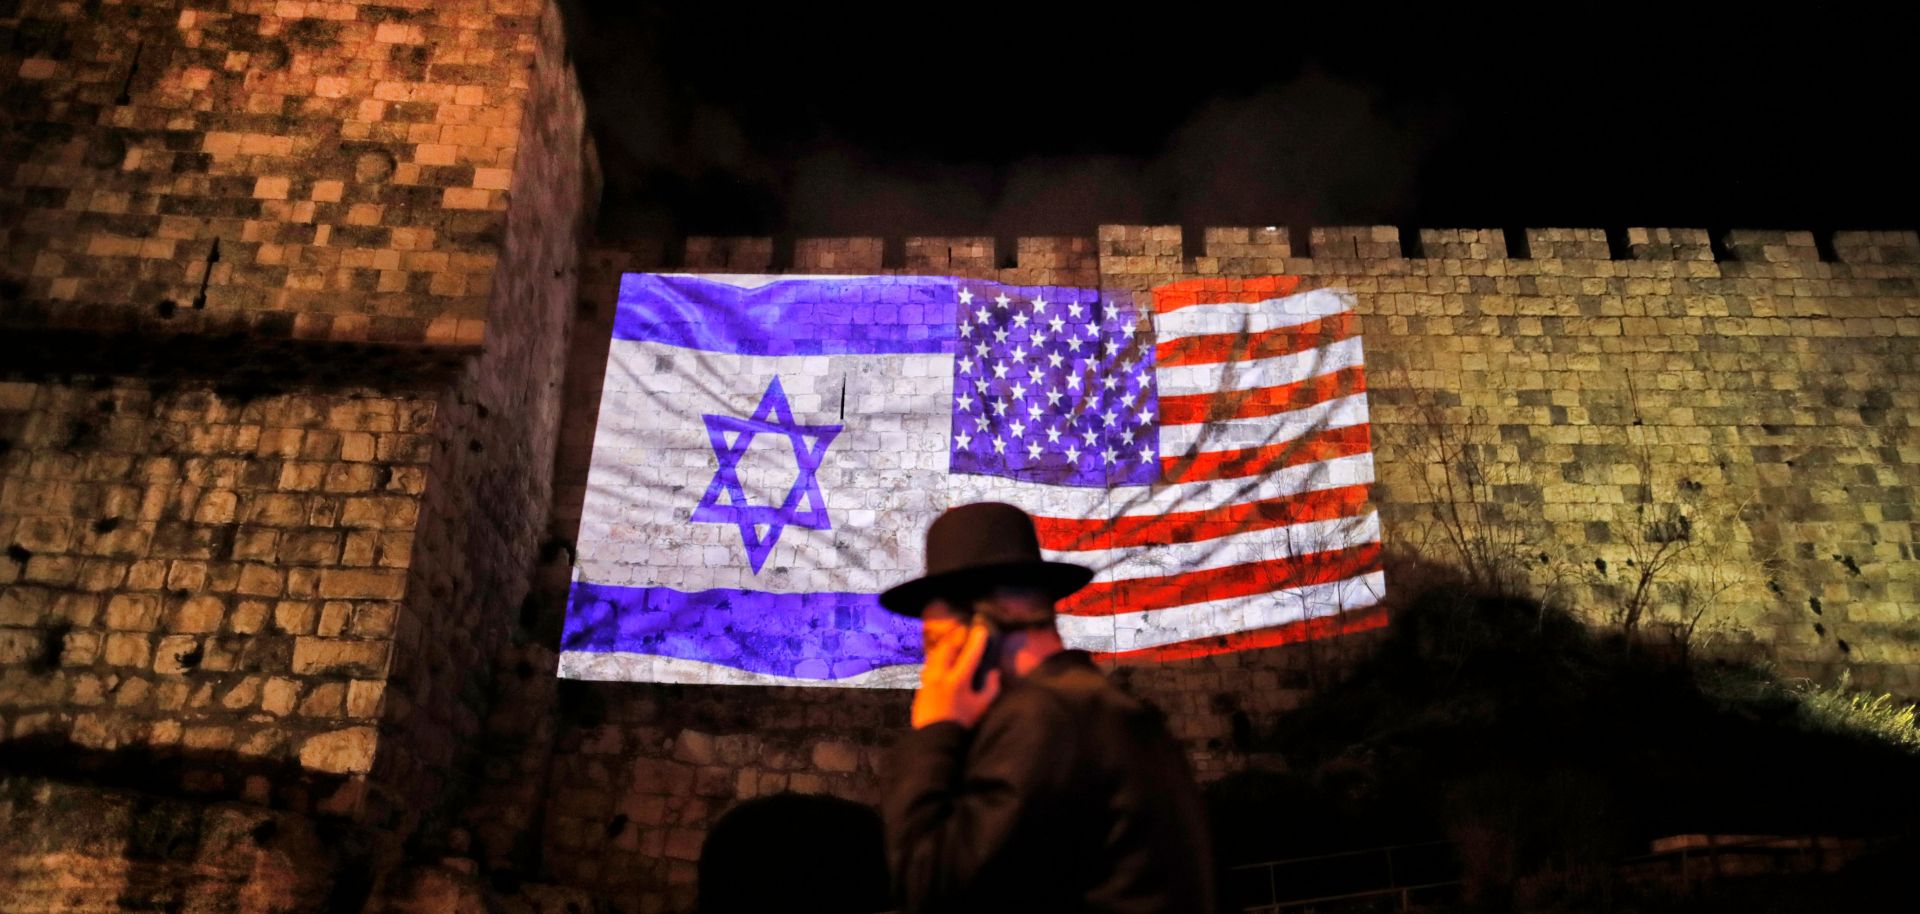 The U.S. and Israeli flags mingle in an image projected on the walls of Jerusalem's Old City.